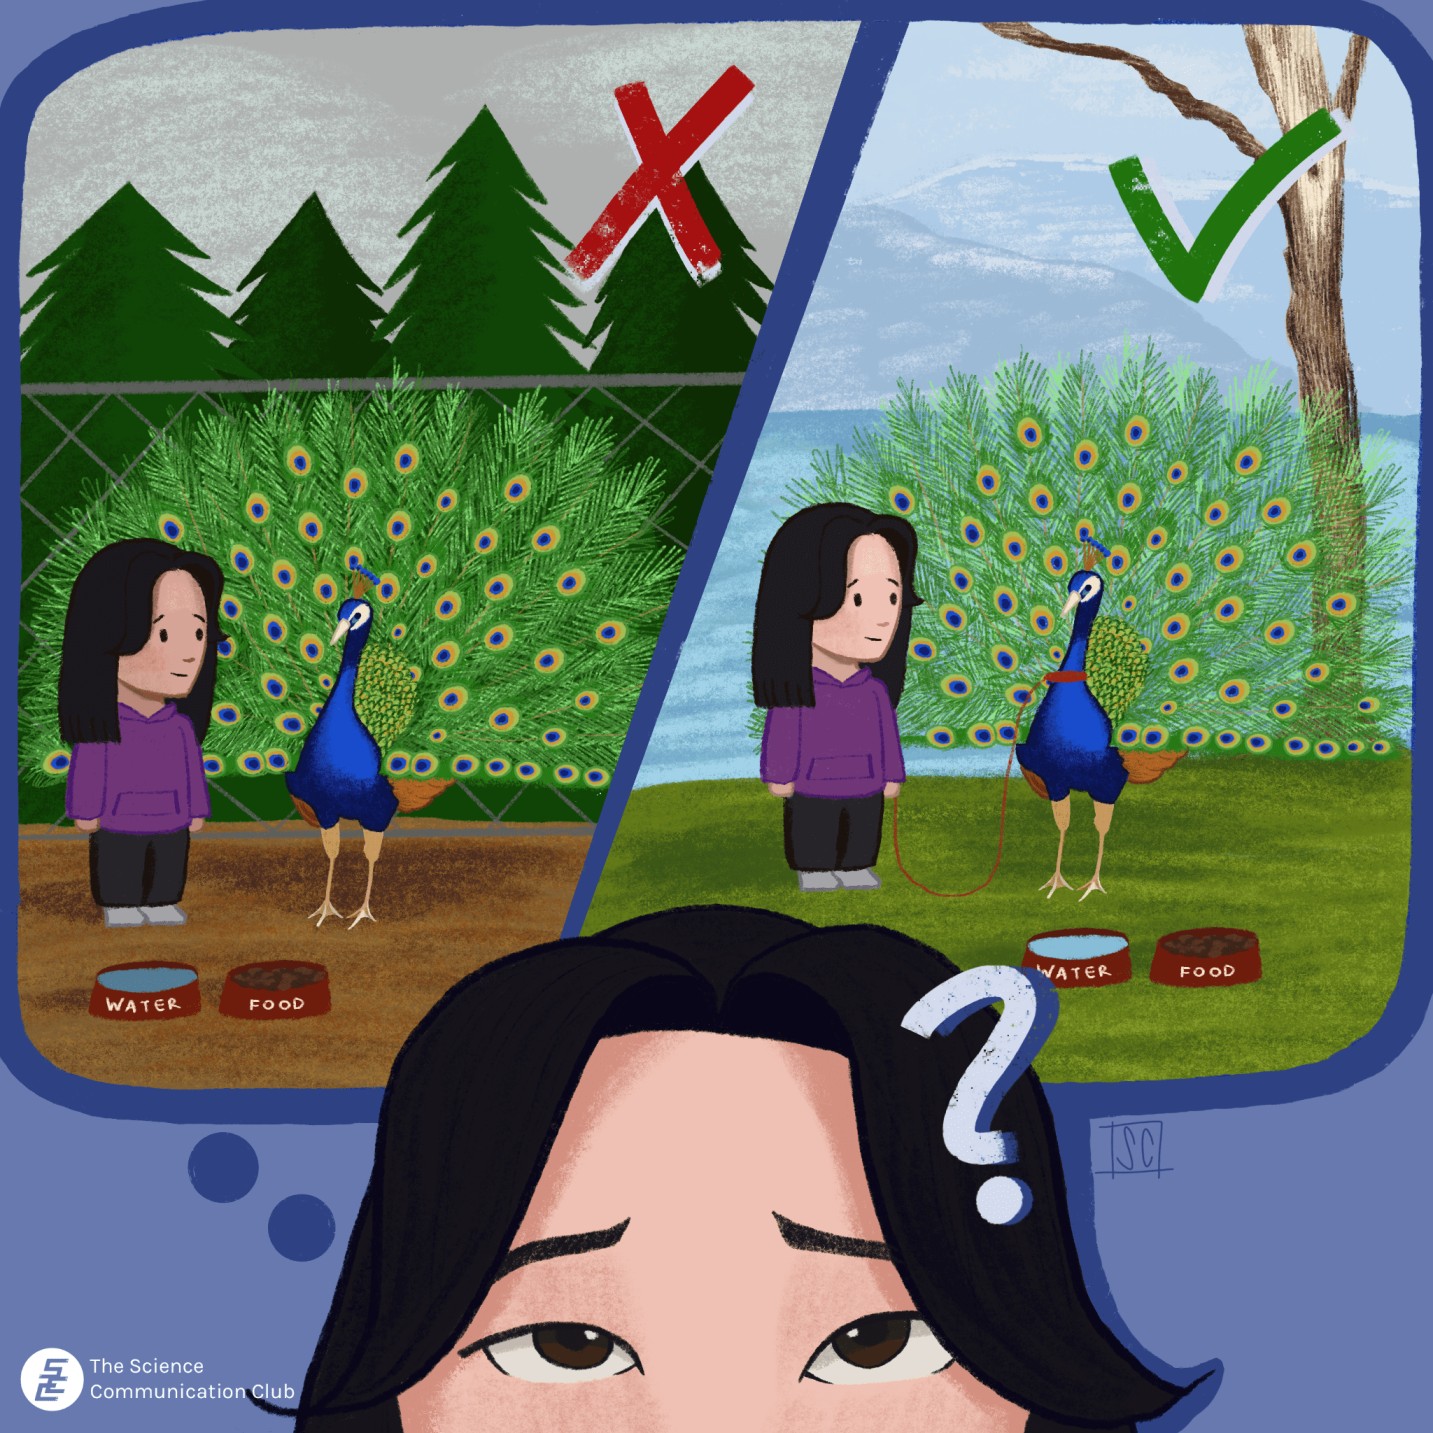 A girl with a question mark and a large thought bubble above her head. On the left, the same girl and her pet peacock are in a rural environment with trees and a fence in the background. On the right, the girl and her leashed peacock are in an outdoor environment, with a tree and the ocean in the background. There is an X on the left side of the bubble, and a checkmark on the right side of the bubble.